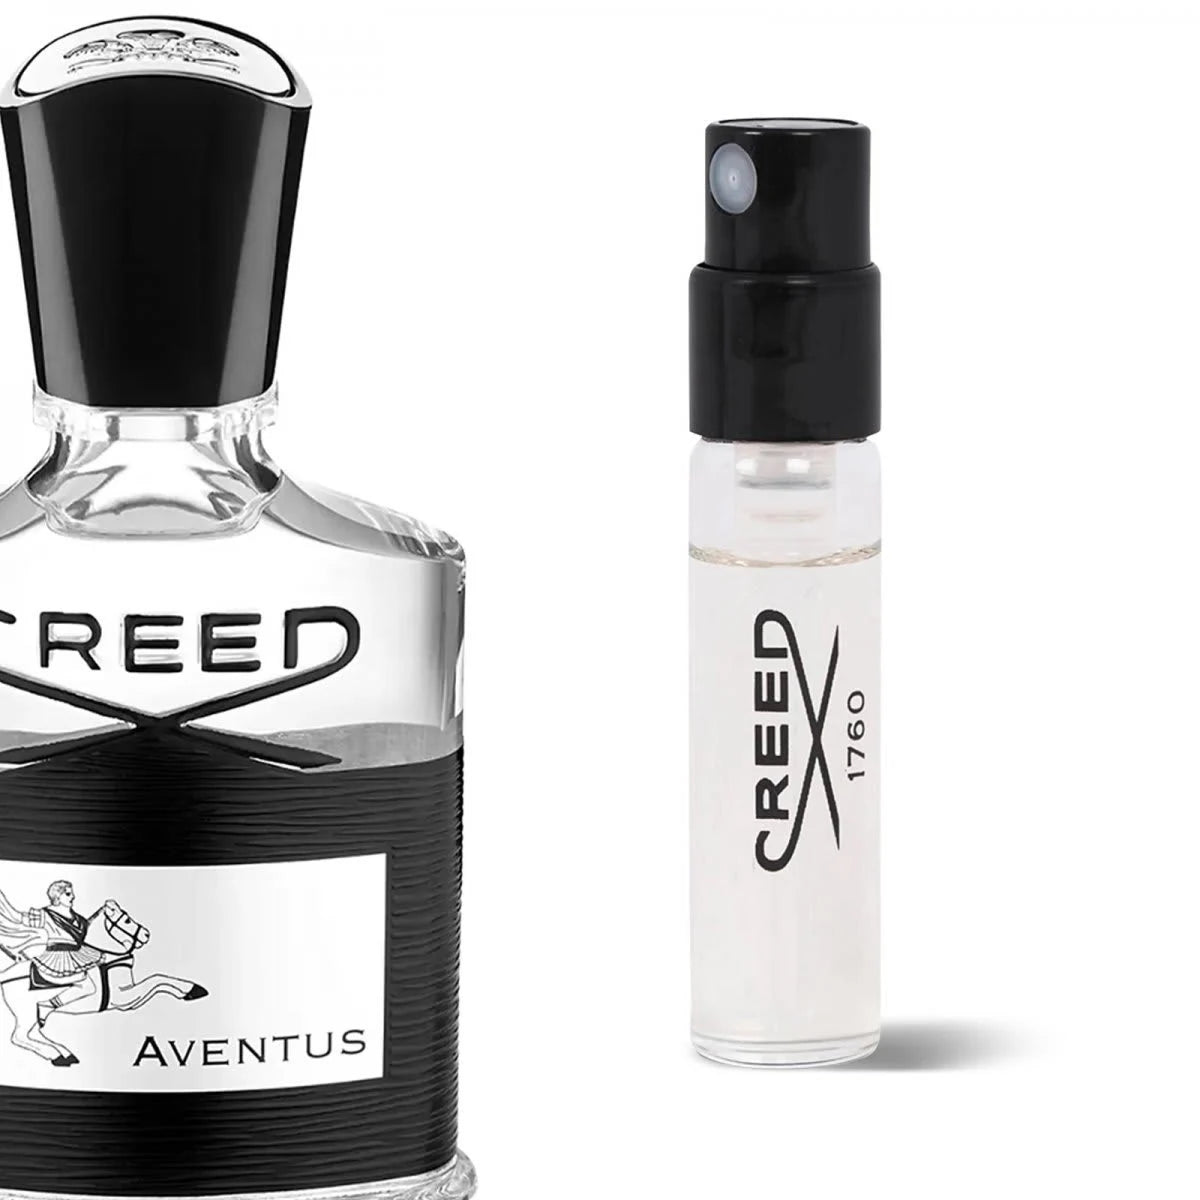 Creed Aventus official perfume samples